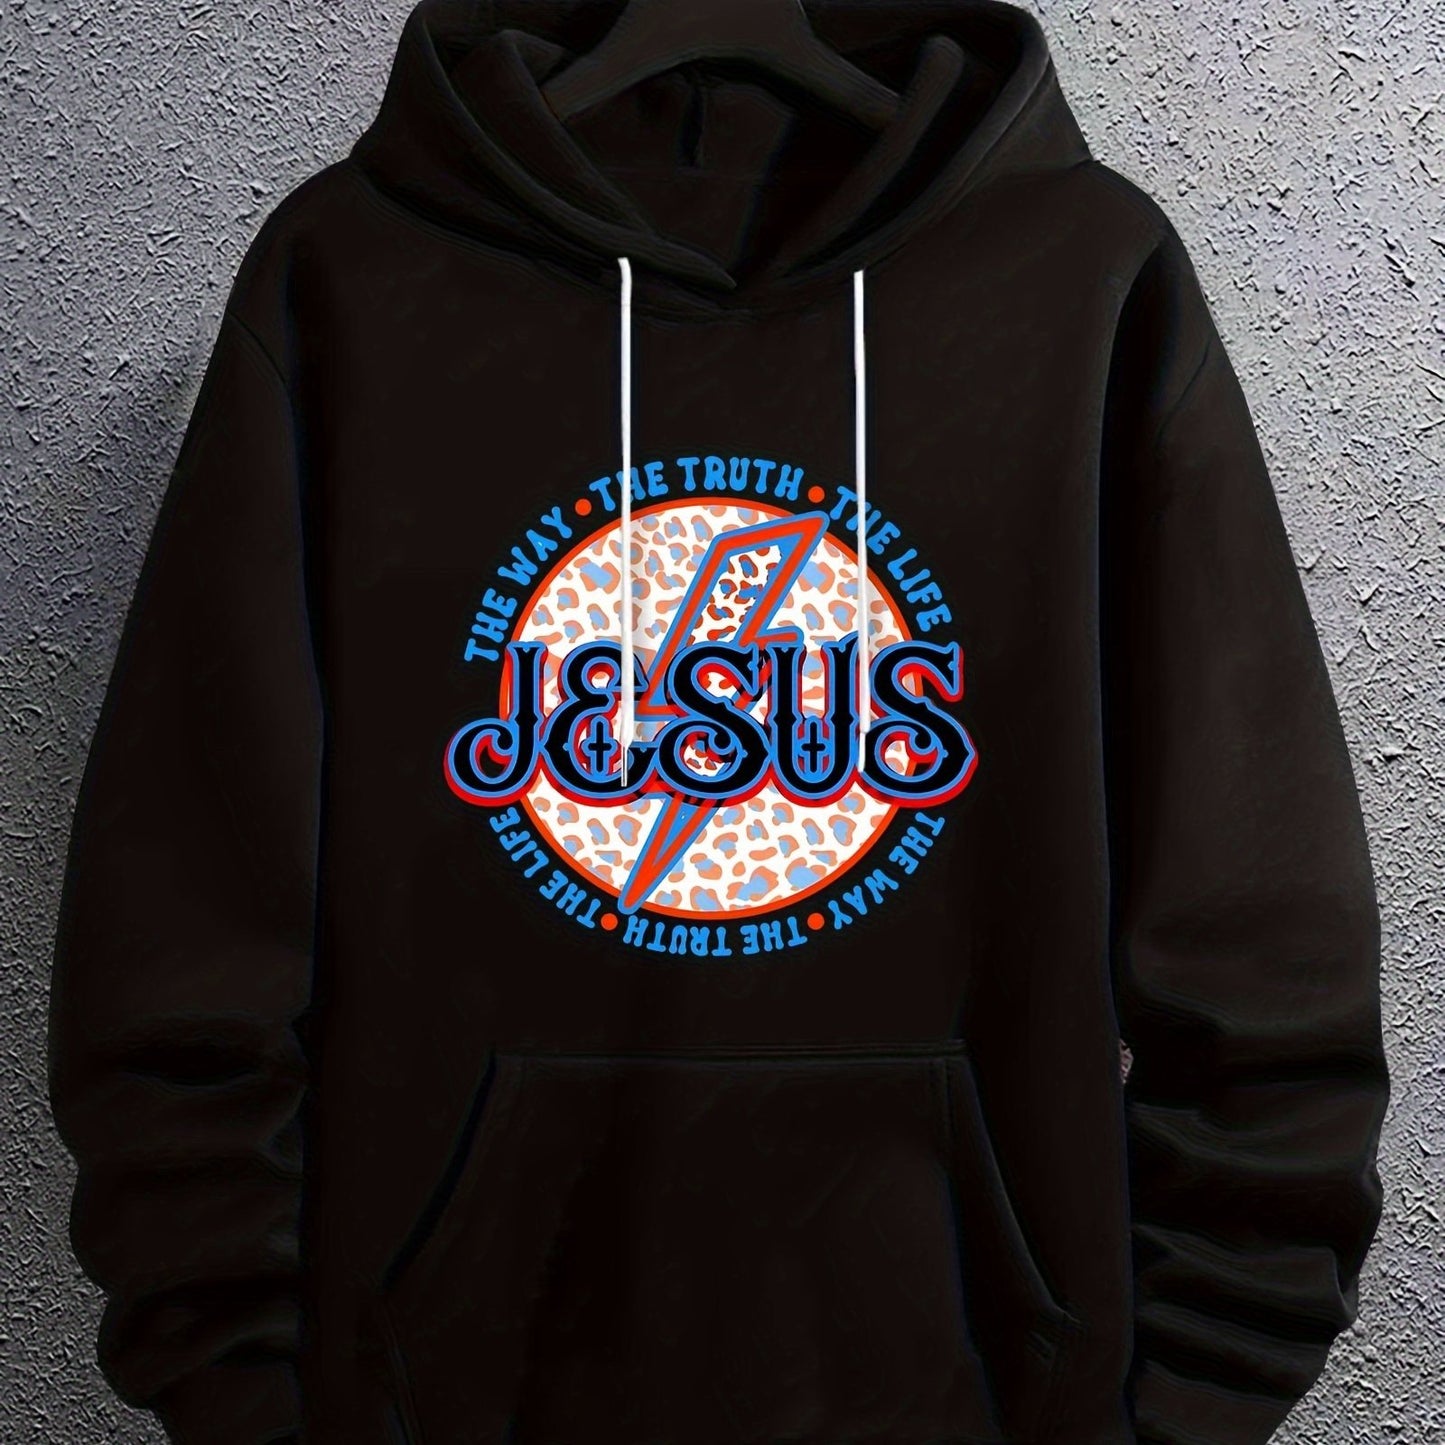 JESUS: The Way The Truth The Life Men's Christian Pullover Hooded Sweatshirt claimedbygoddesigns